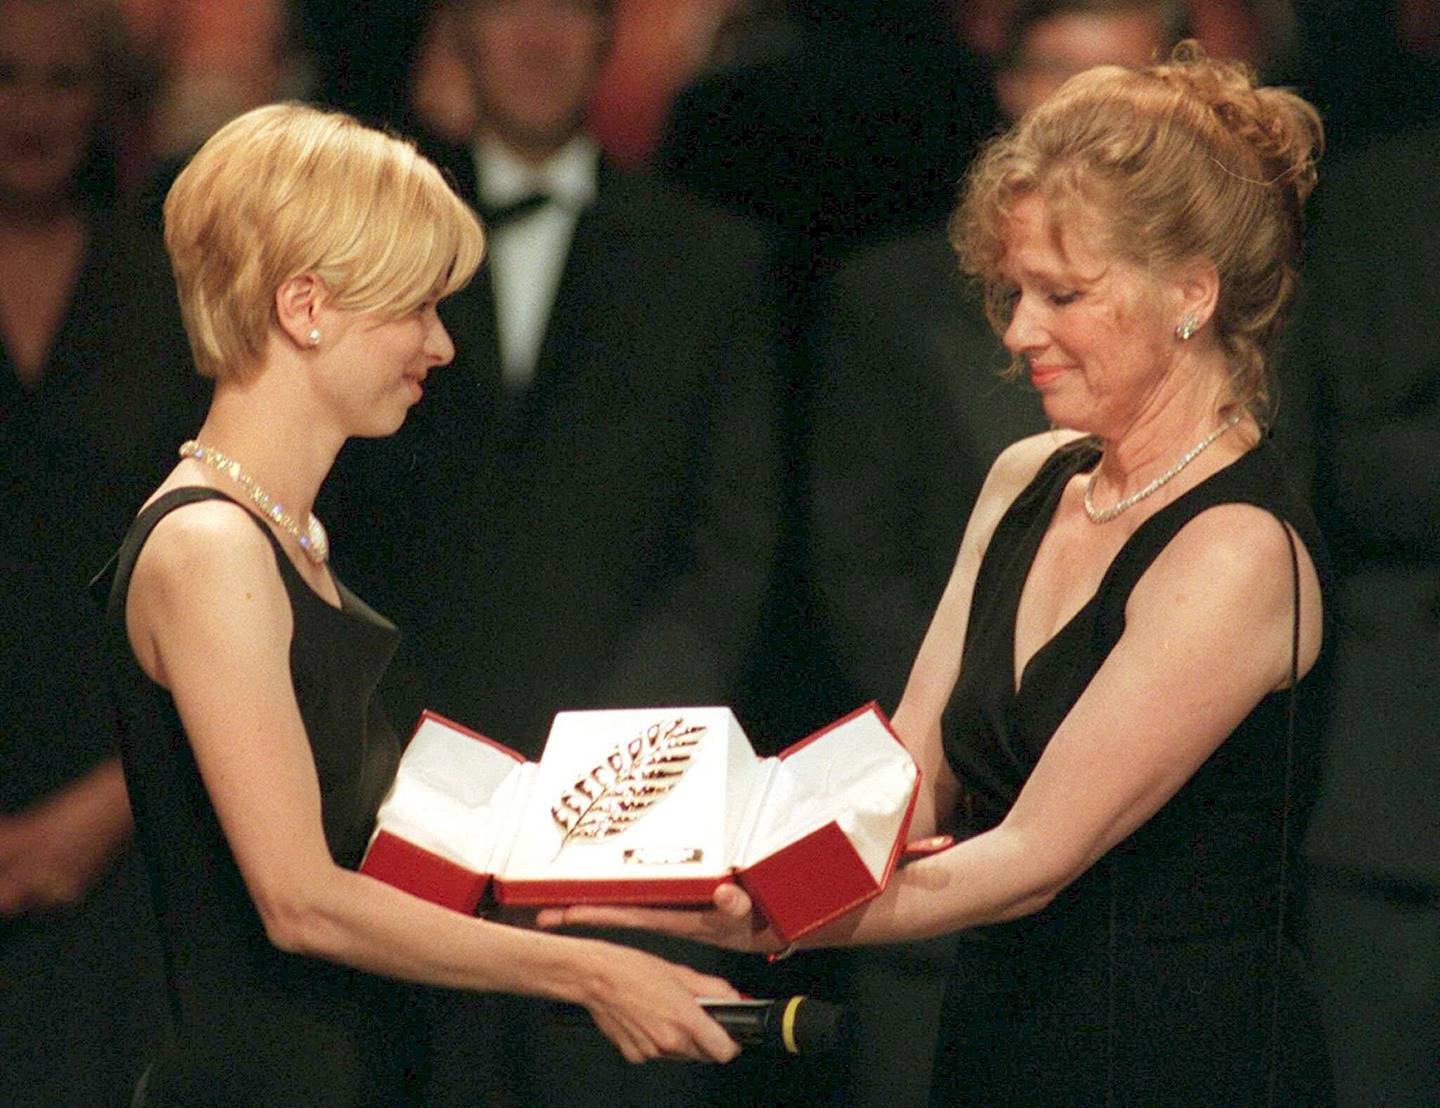 Linn Ullmann, left, receives on behalf of her father, Swedish director Ingmar Bergman the Palm of the Golden Palms from her mother, Norwegian actress Liv Ullmann Sunday May 11, 1997, at the festivals Palace in Cannes. The Cannes film festival is celebrating its 50th anniversary Sunday. (AP PHOTO/Patrick Hertzog/POOL)